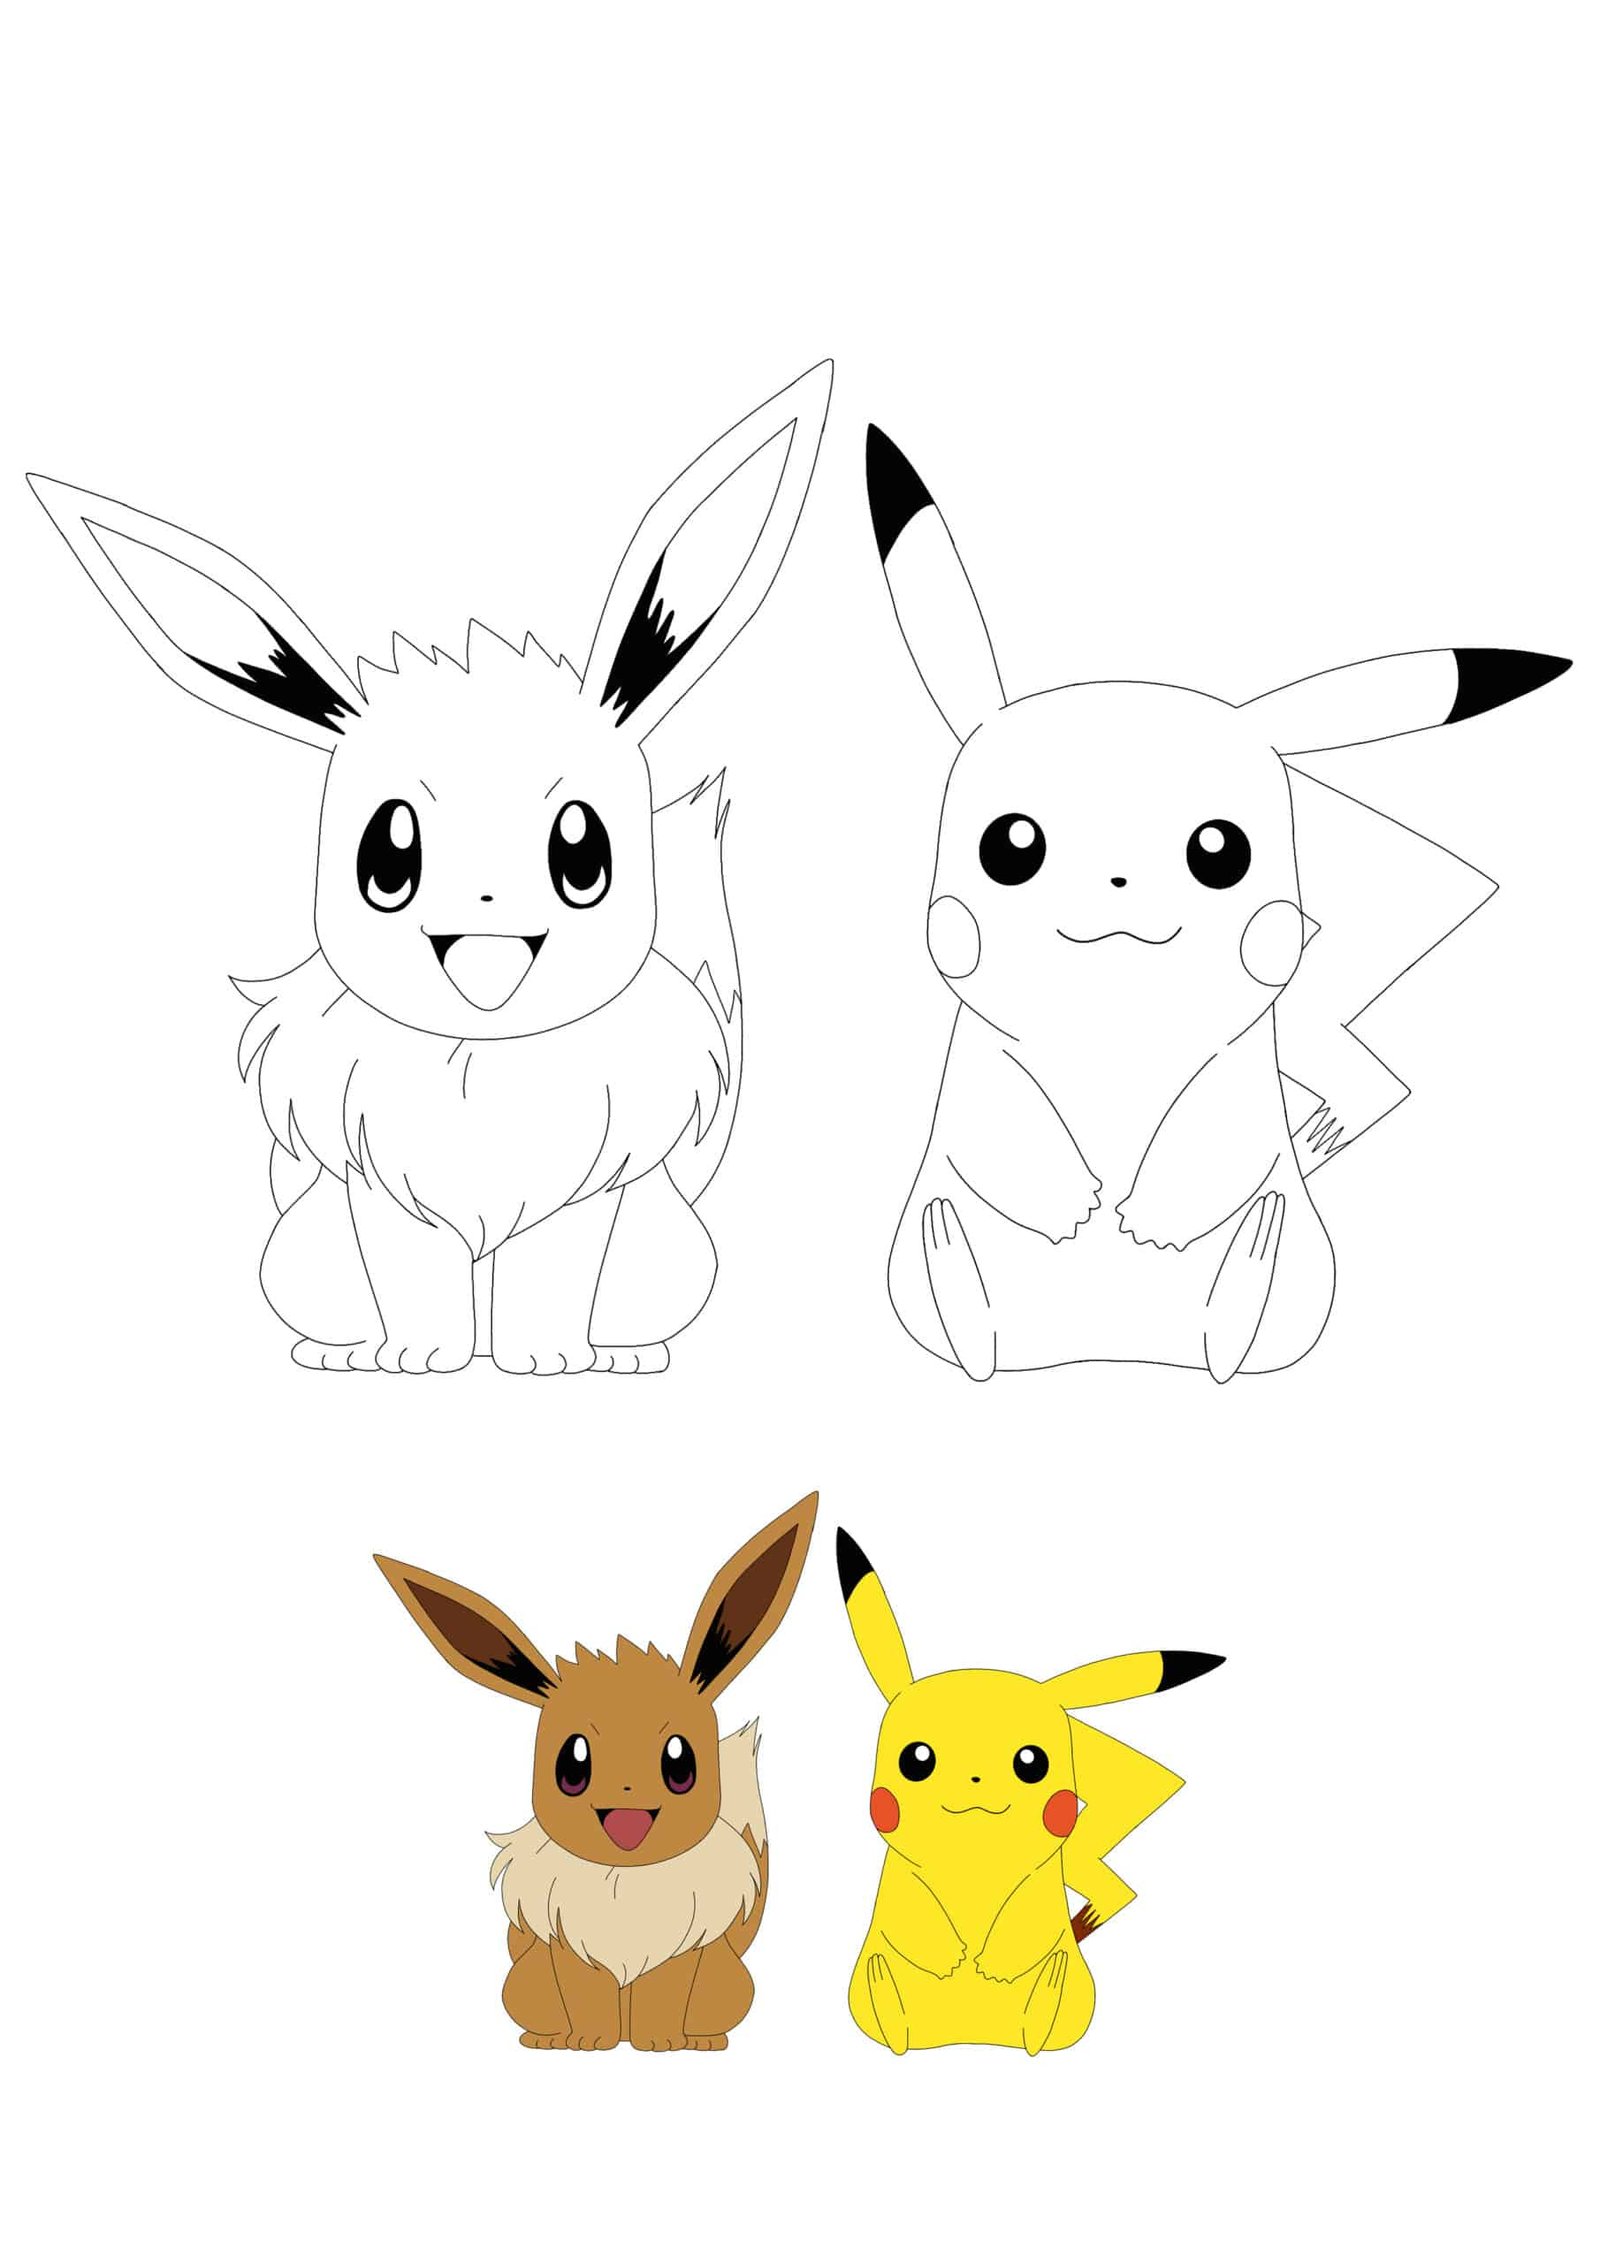 Pikachu and Eevee free coloring page for boys and girls